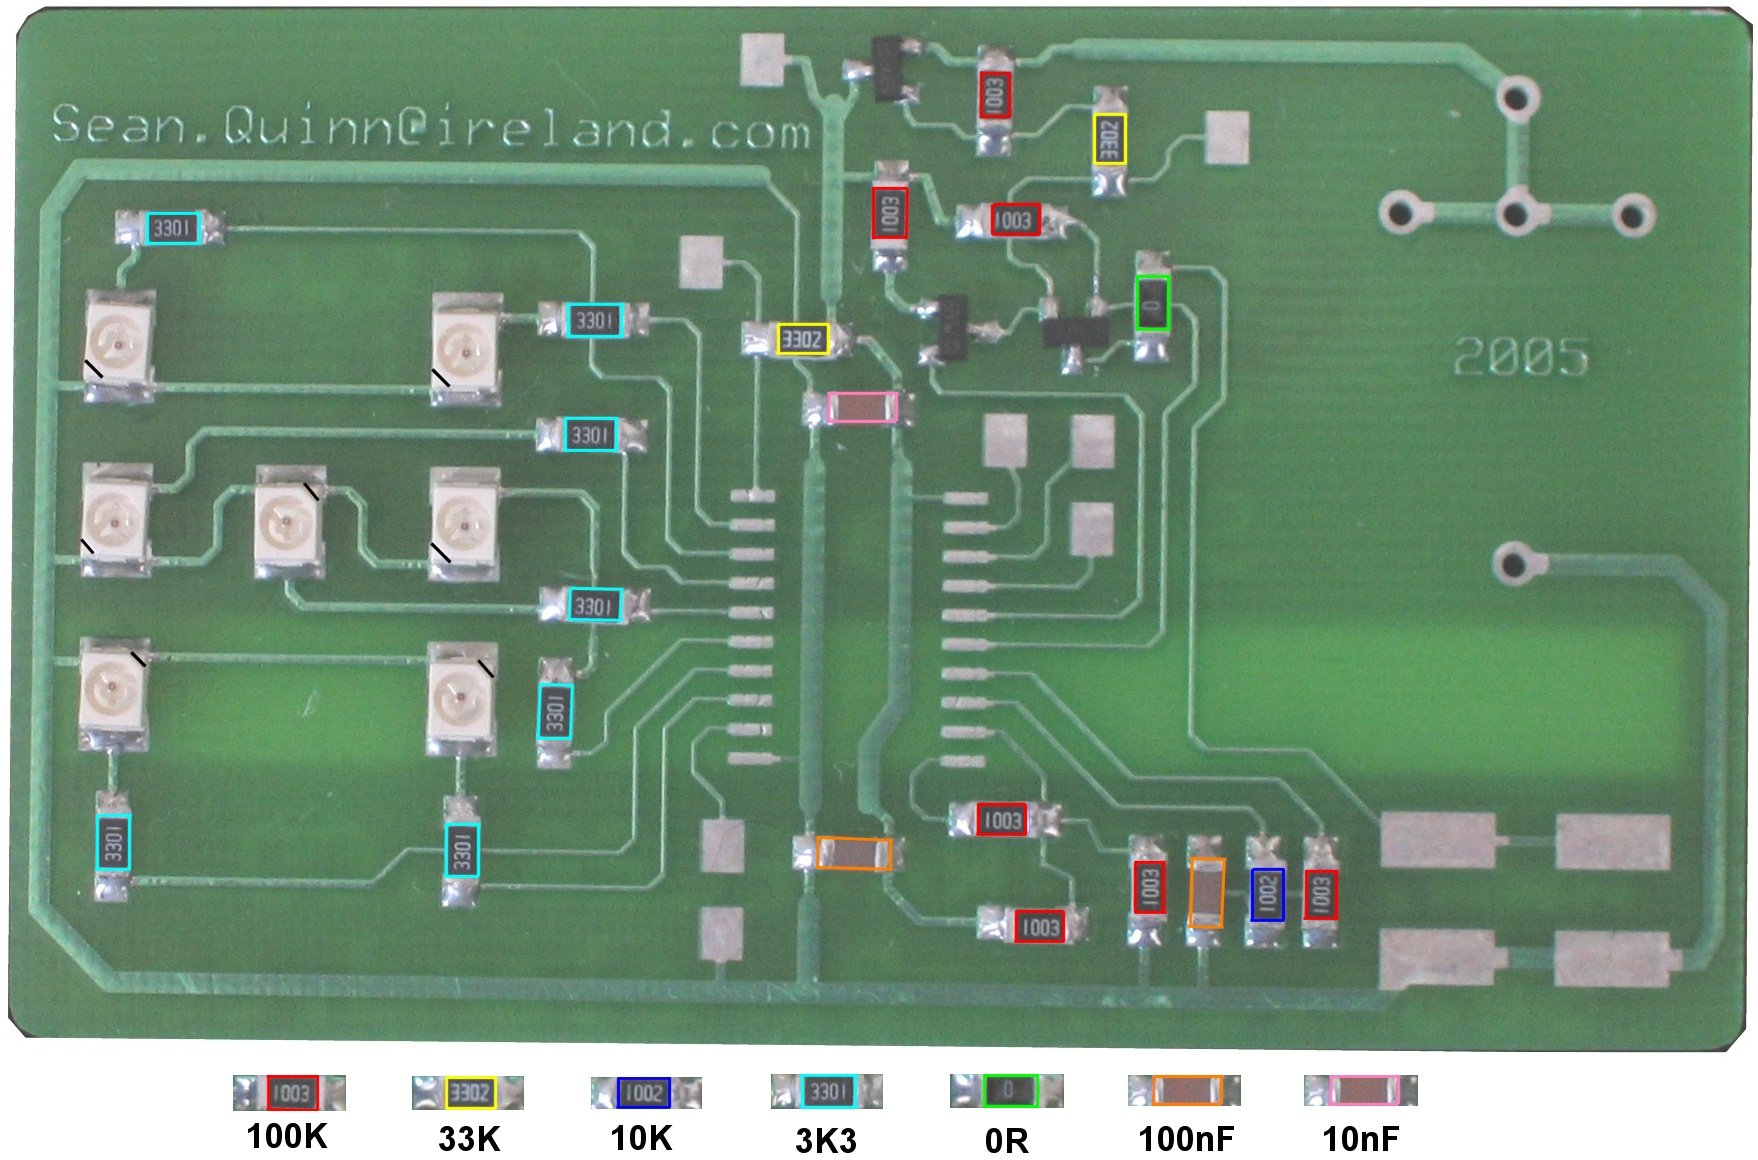 Component positions for the printed circuit board